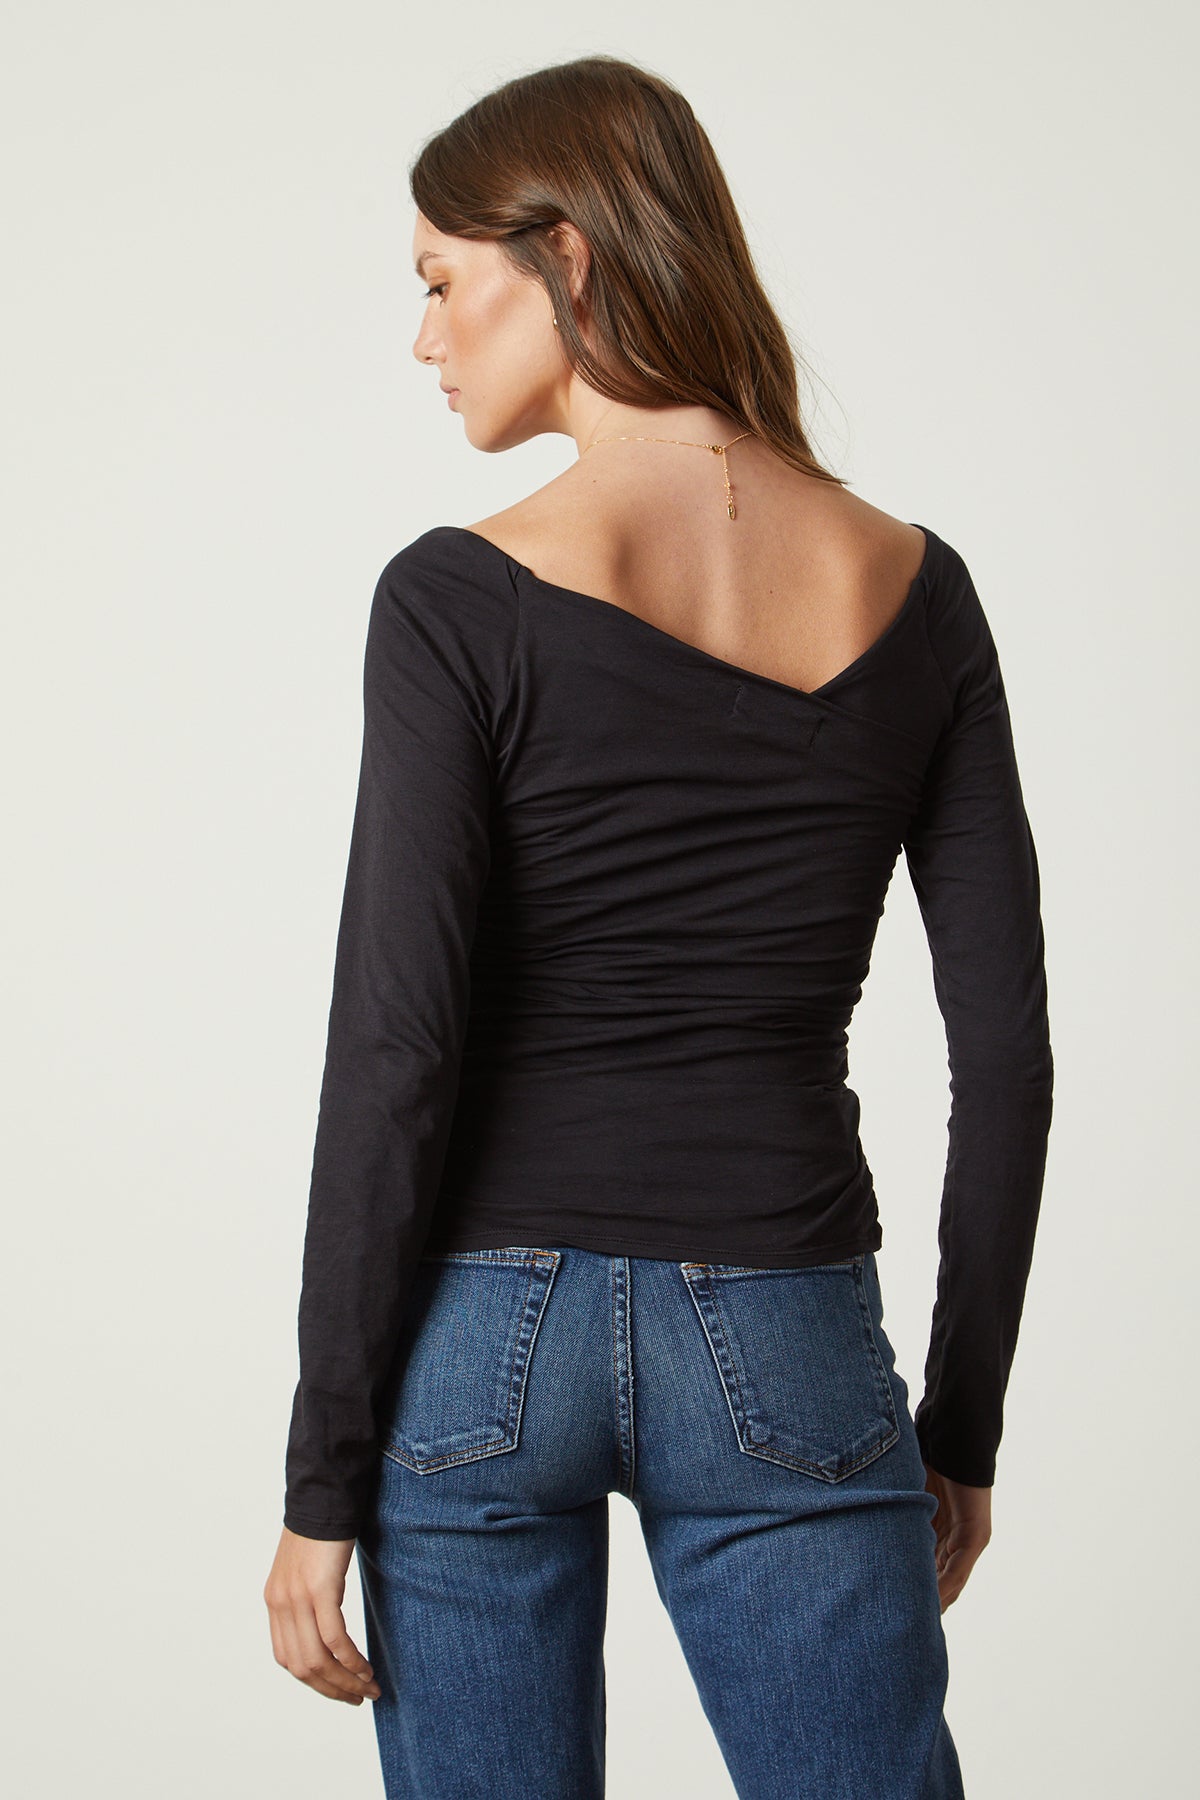 Tabbie Shirred Fitted Tee in black with blue denim back-25548612042945